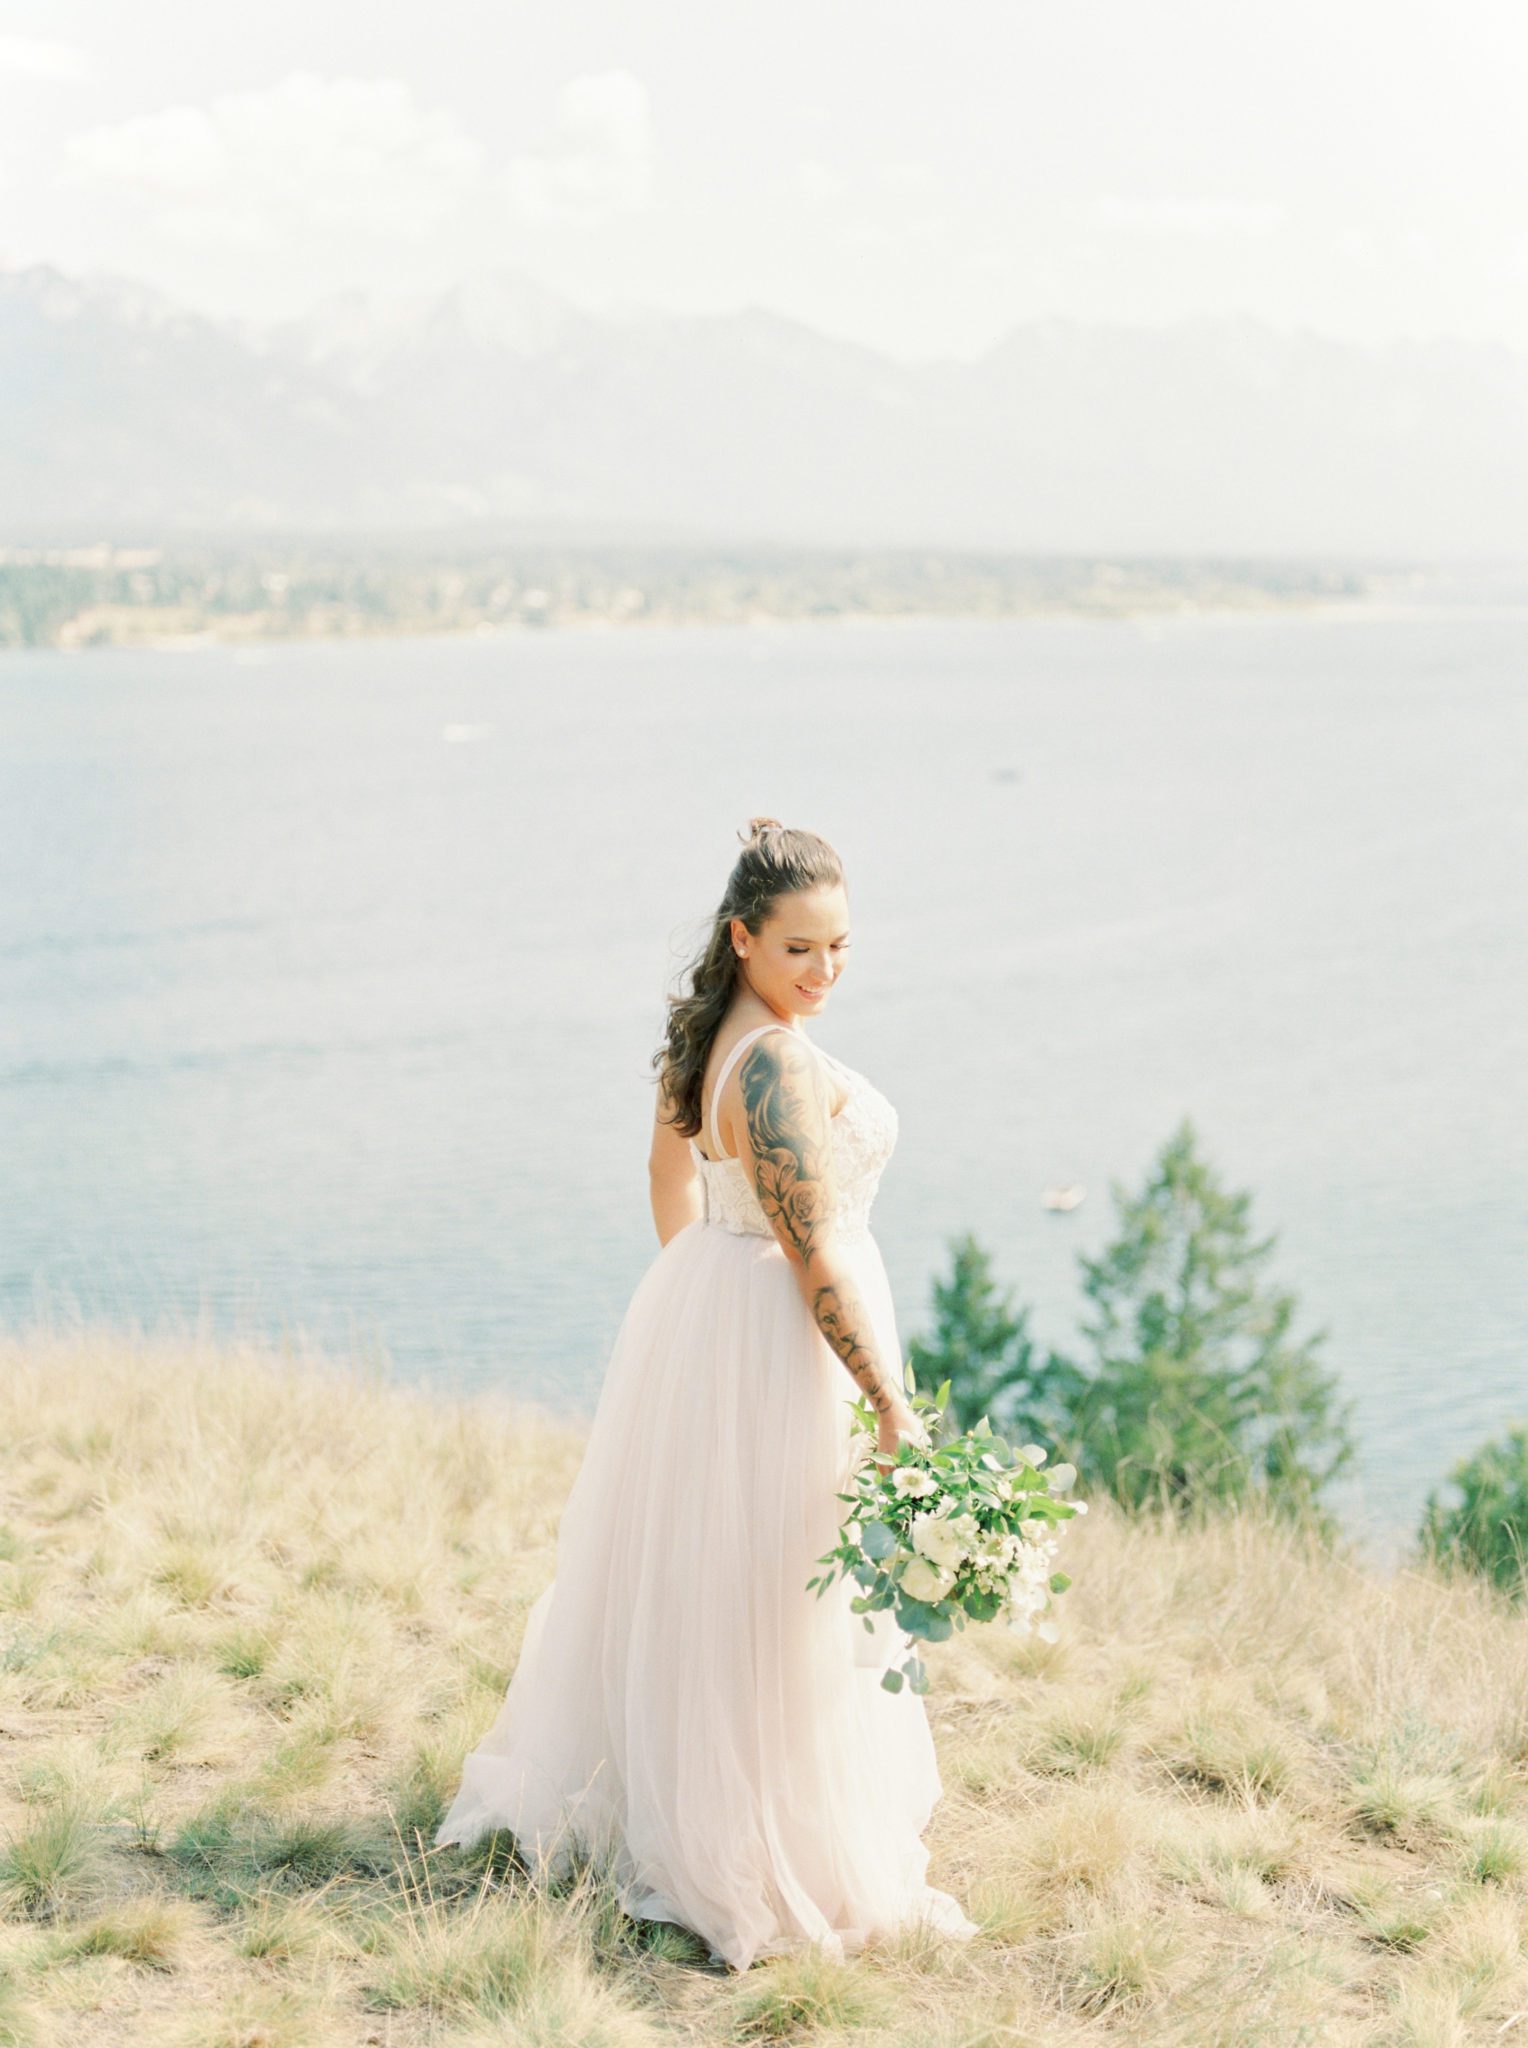 Lake Invermere summer wedding with stunning views